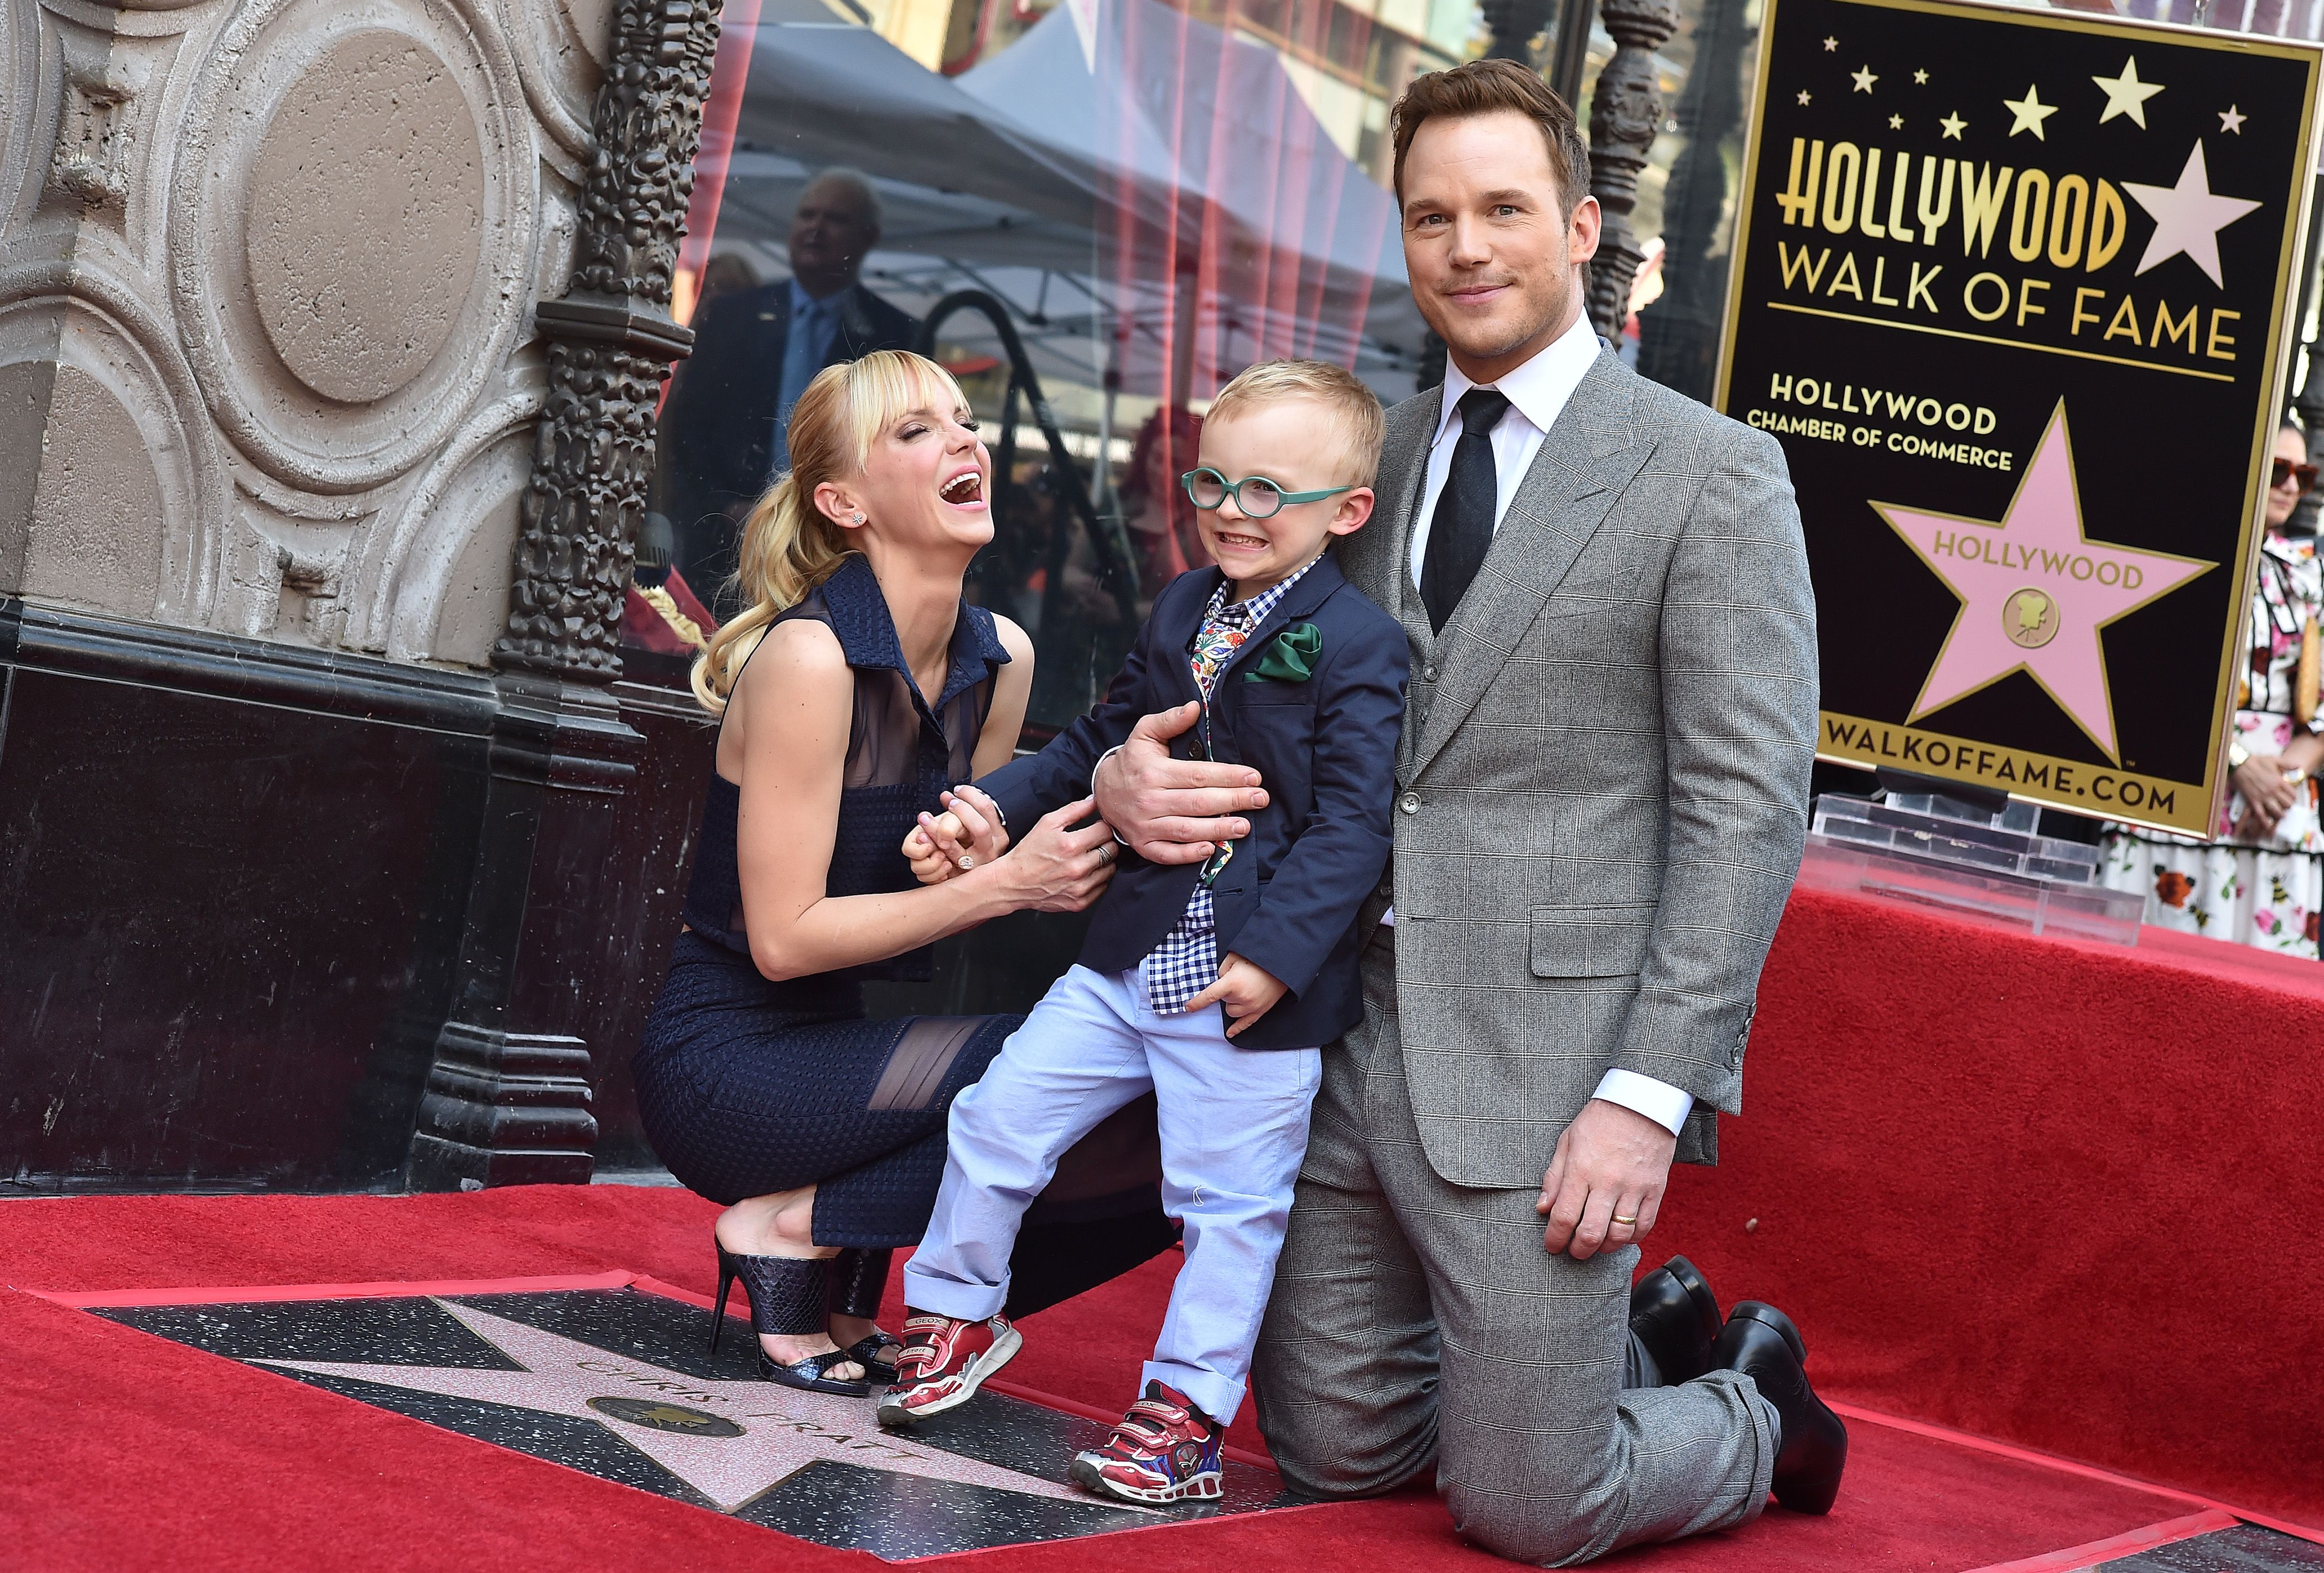 Chris Pratt, Anna Faris, and Jack Pratt during the ceremony honoring Chris Pratt with a star on the Hollywood Walk of Fame on April 21, 2017 in Hollywood, California. | Source: Getty Images